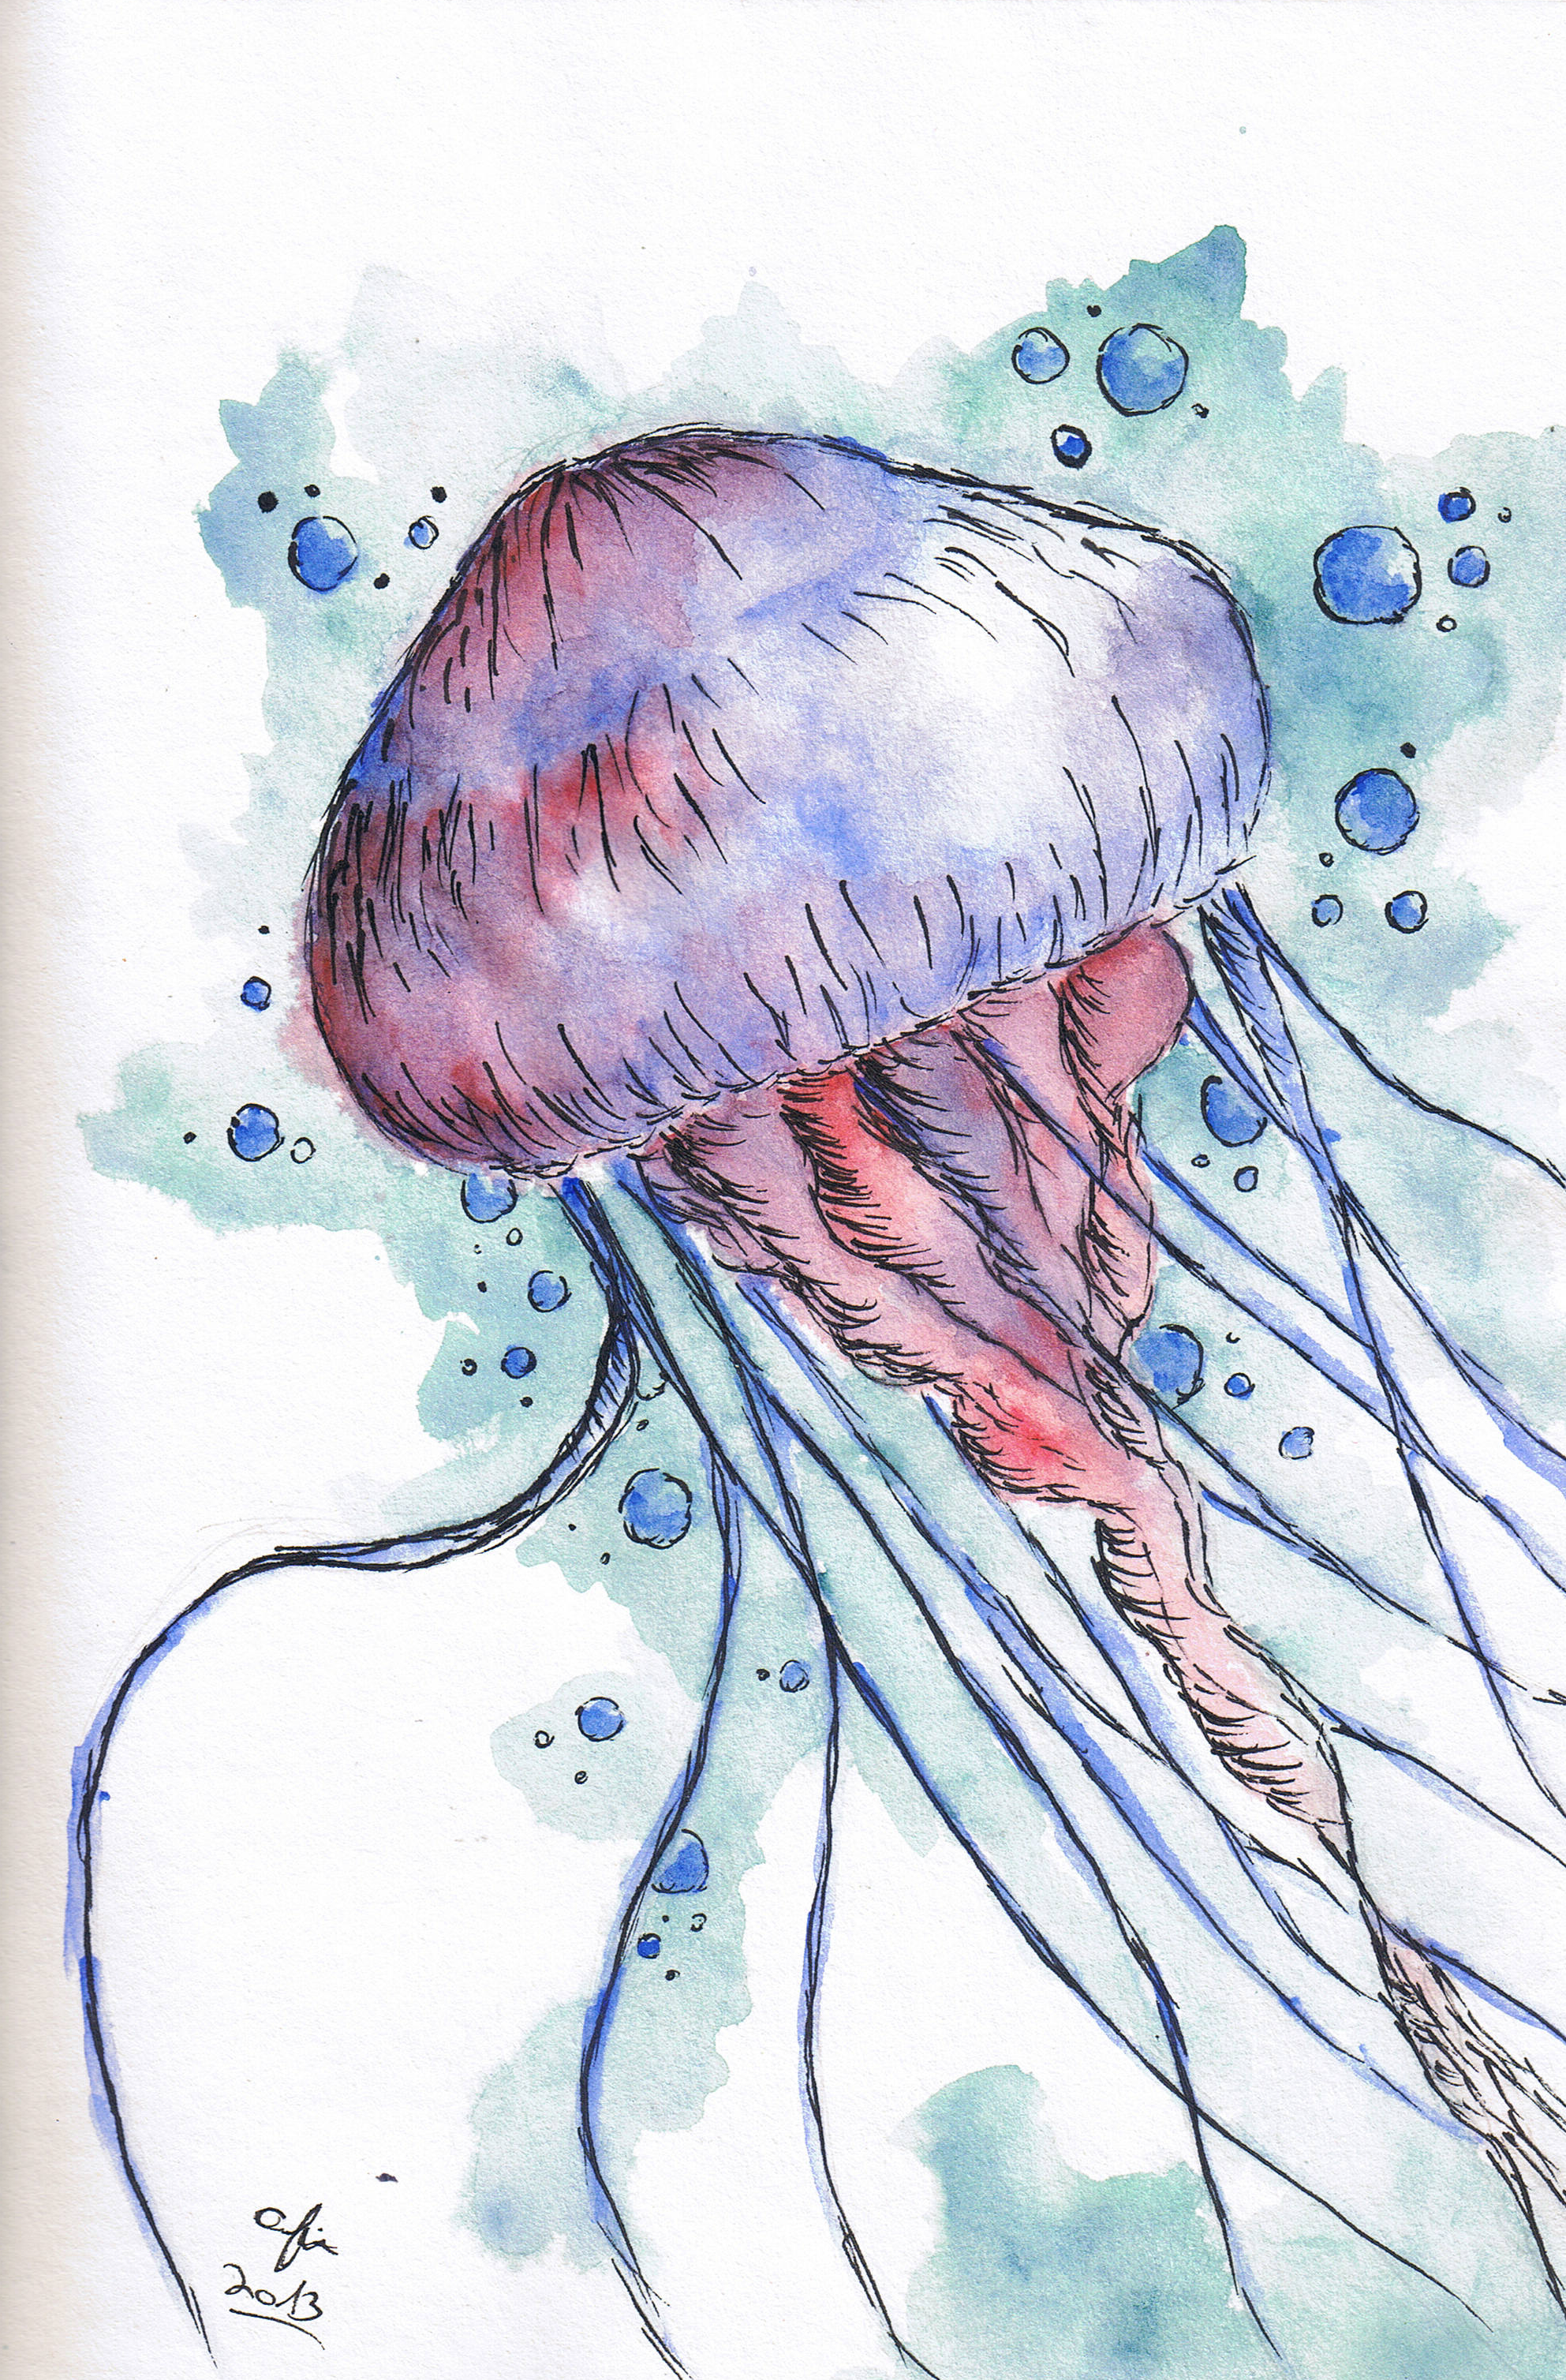 jellyfish clipart watercolor